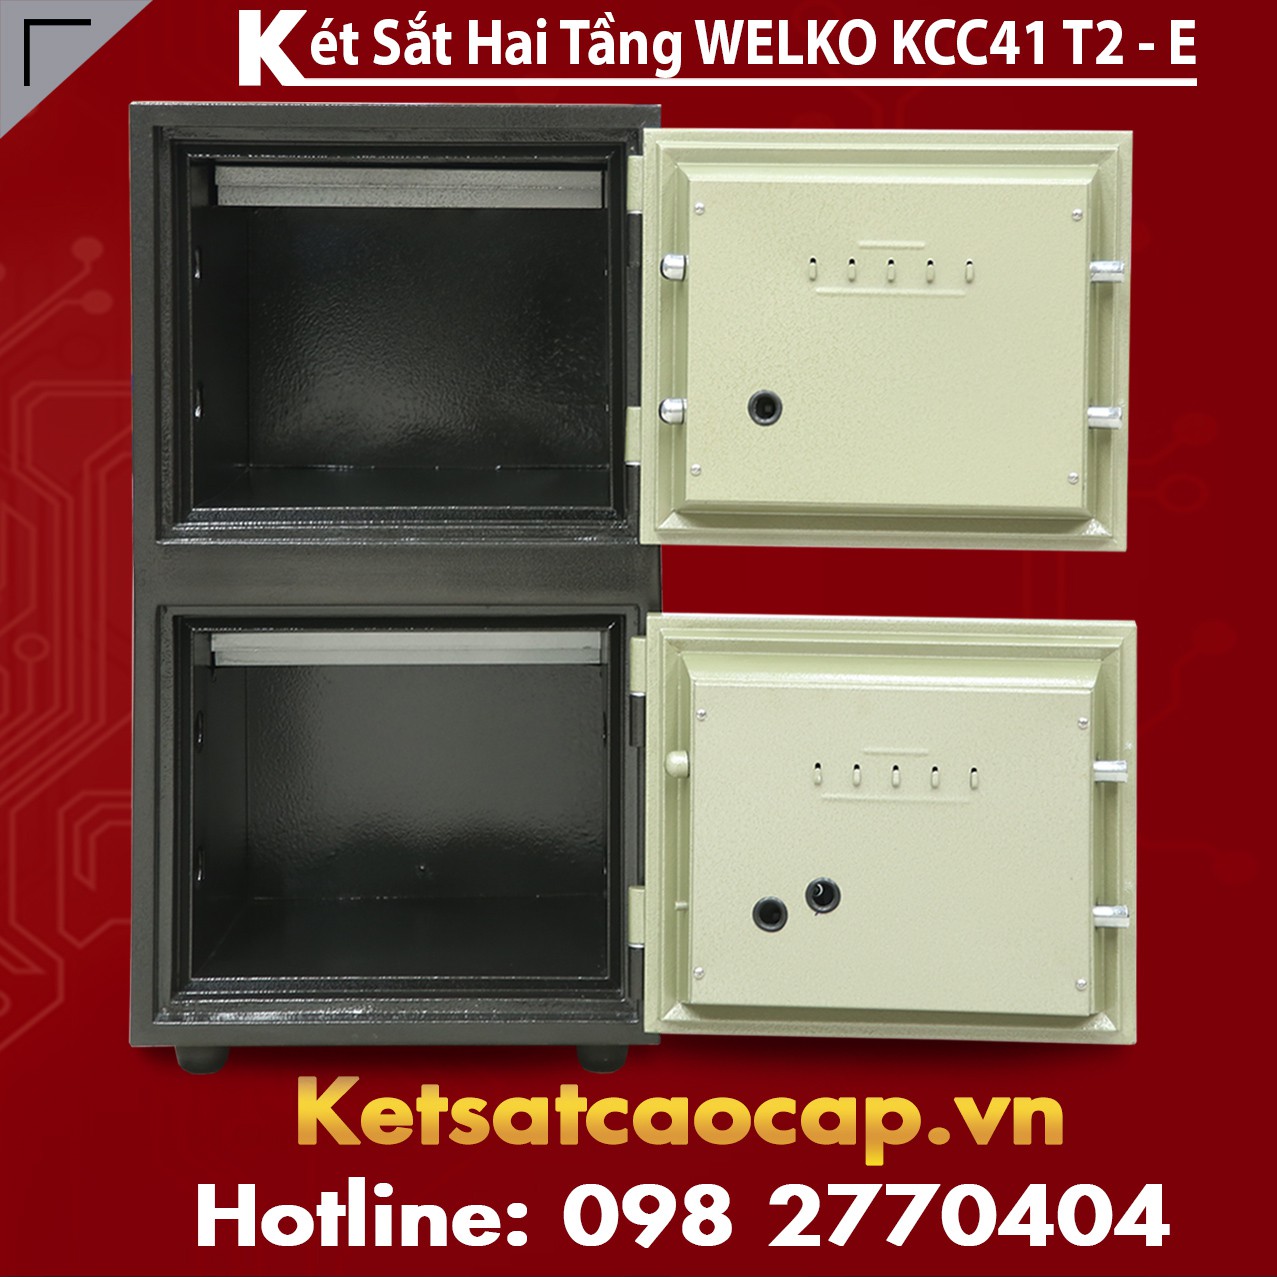 Fire Resistant Safes Manufacturers High Quality Factory Price Co So San Xuat Ket Sat Dung Tien Tung Nhan Vien Cao Cap